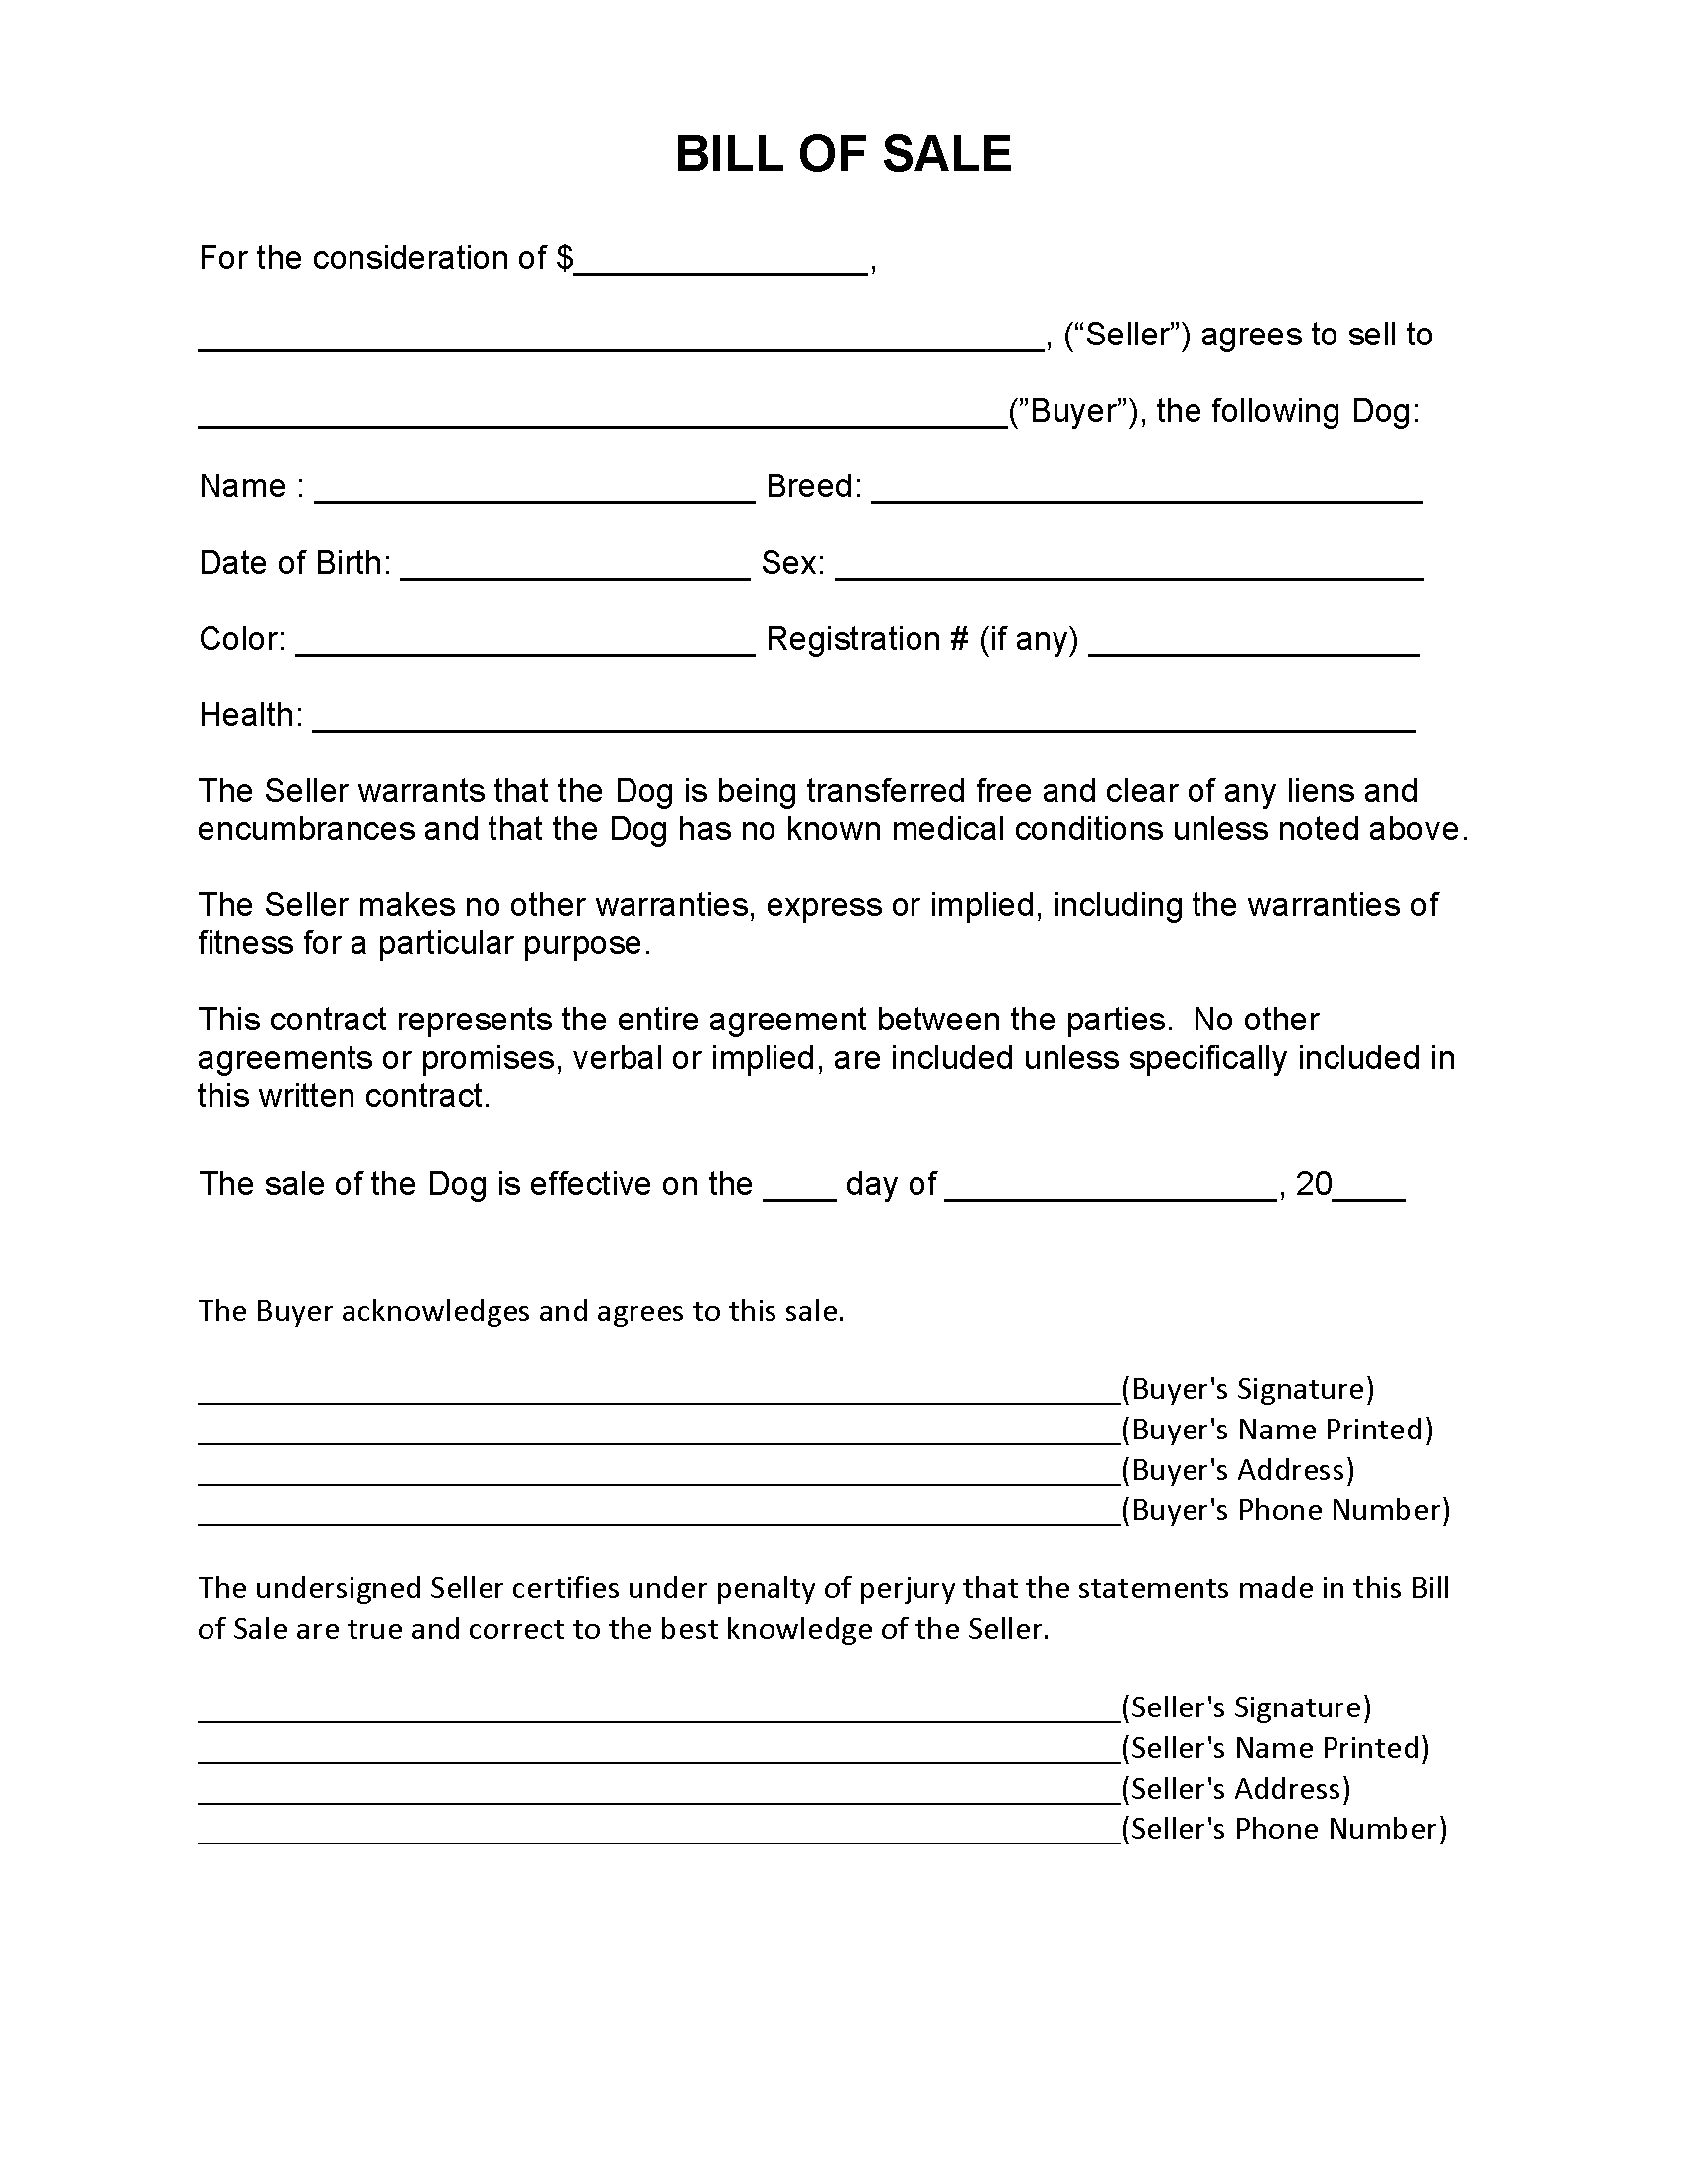 Dog Bill of Sale Form Fillable PDF Free Printable Legal Forms